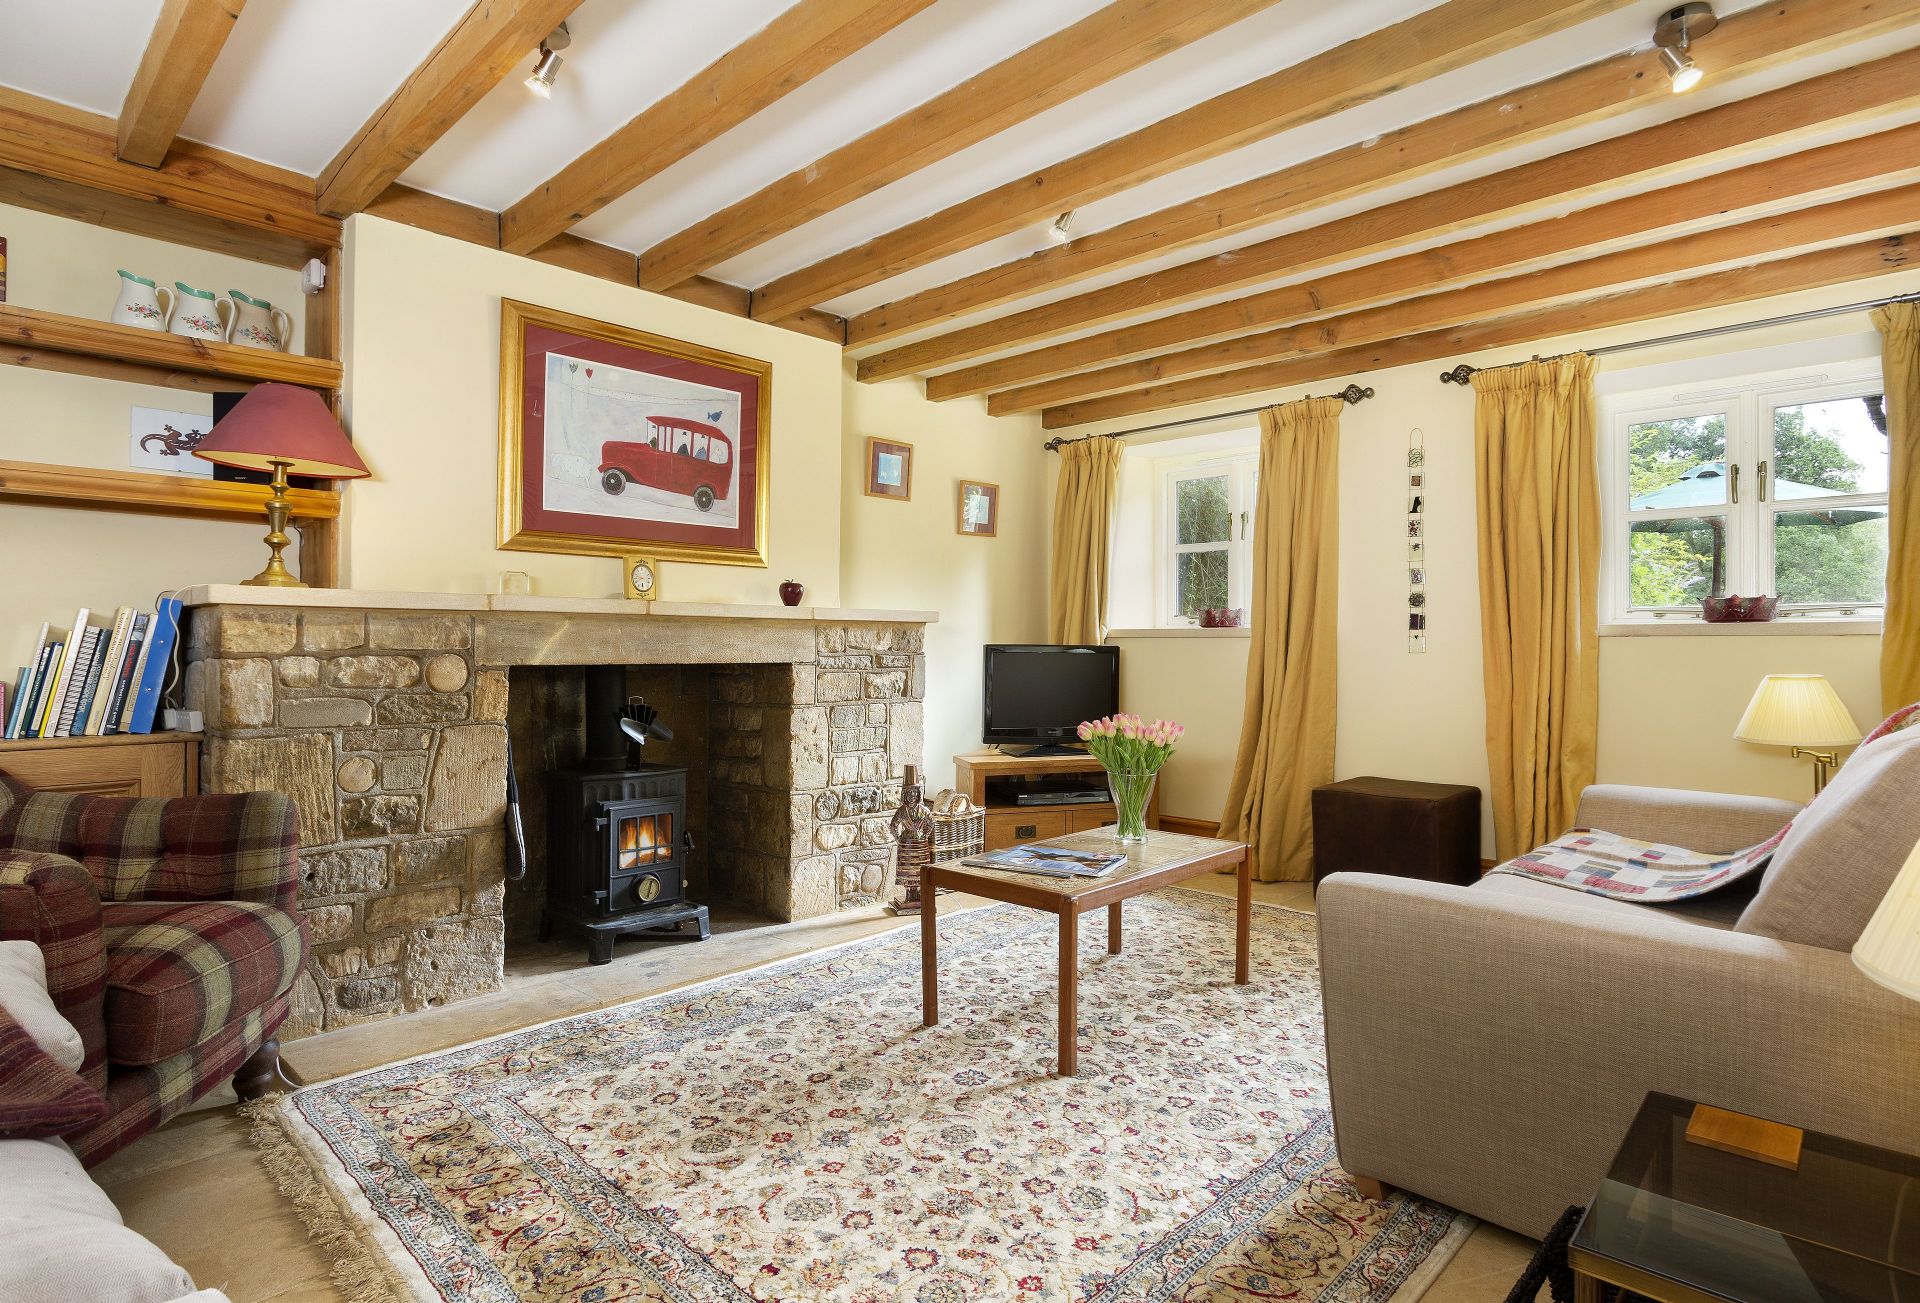 Dyers Cottage is located in Guiting Power